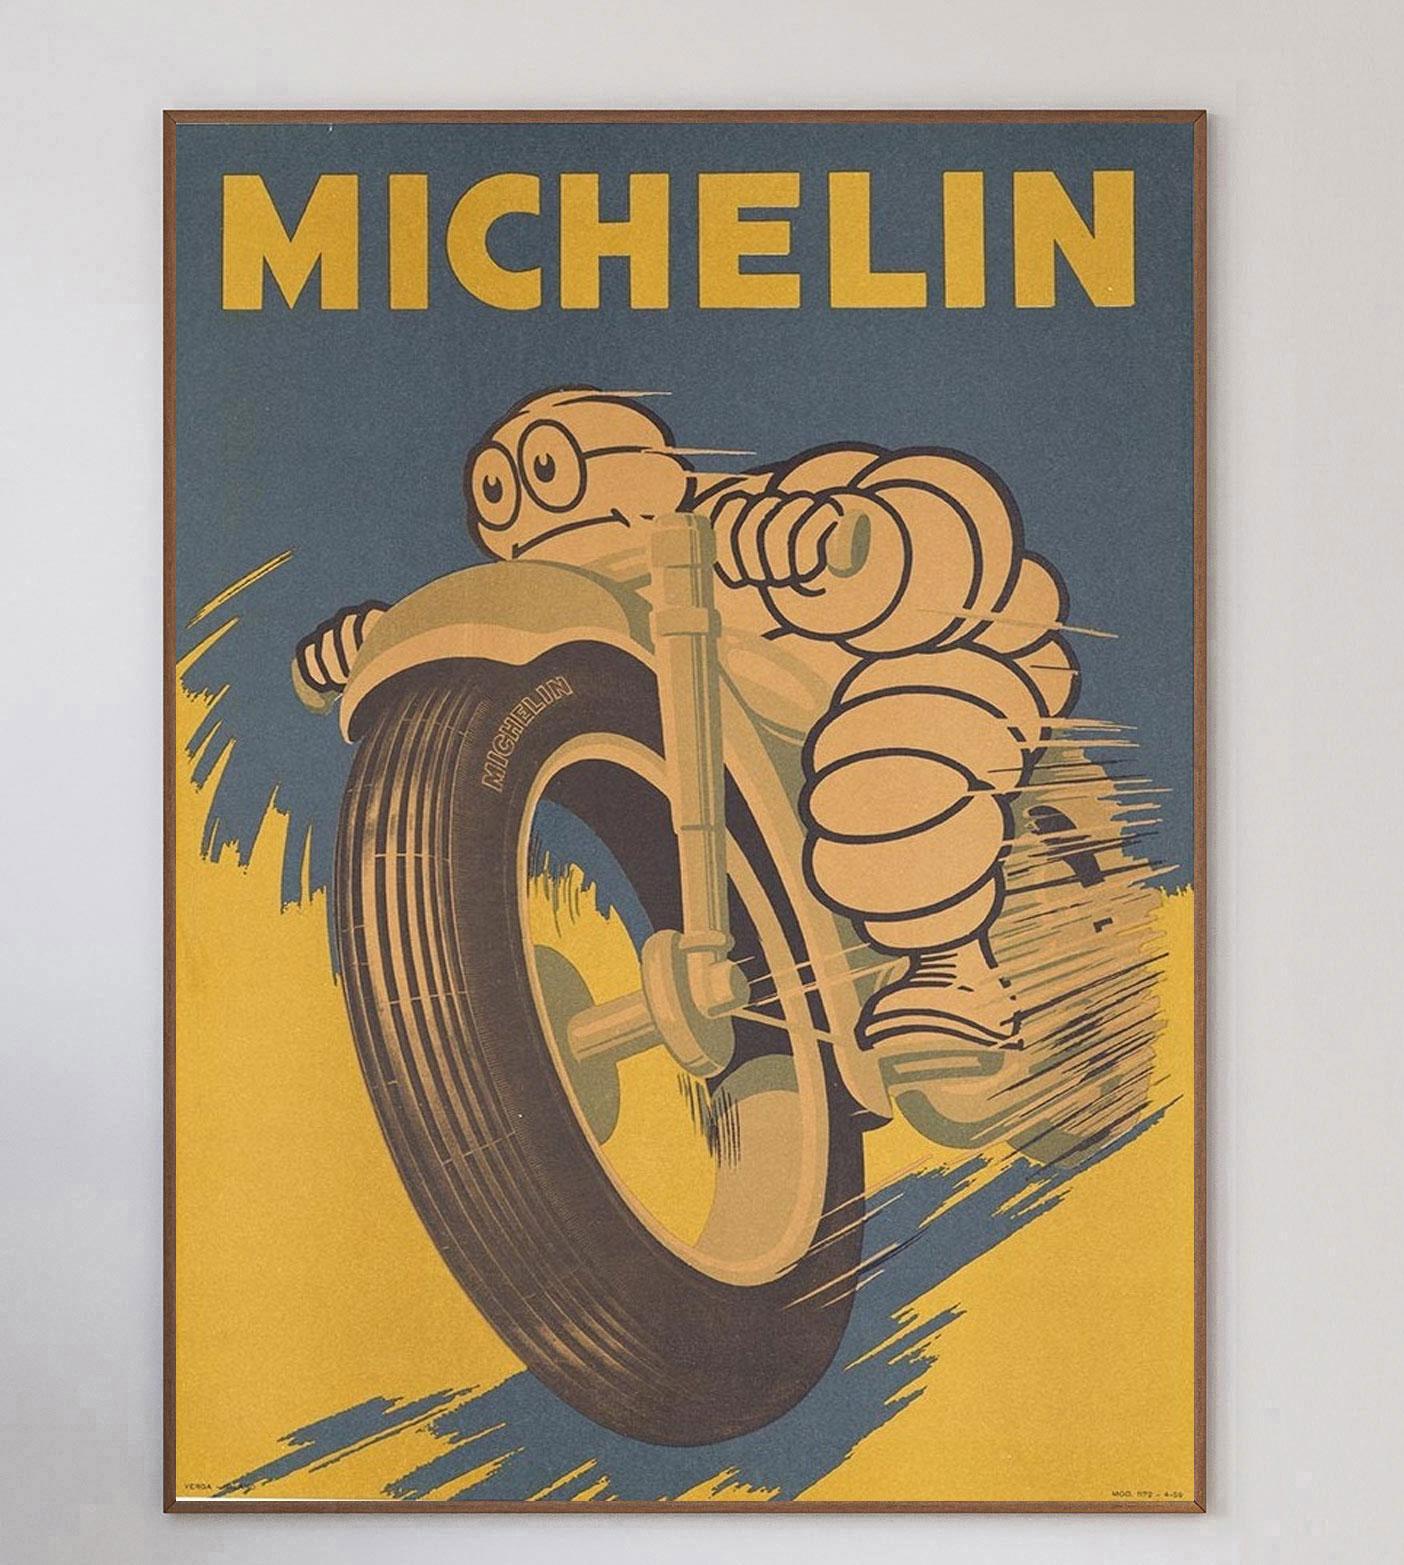 A wonderful poster printed by Verga Printers Milano, this advertisement poster for Michelin tyres was created in 1959 and depicts Michelin mascot Bibendum aka the Michelin Man riding on a motorcycle.

Bibendum was created by Marius Rossillon